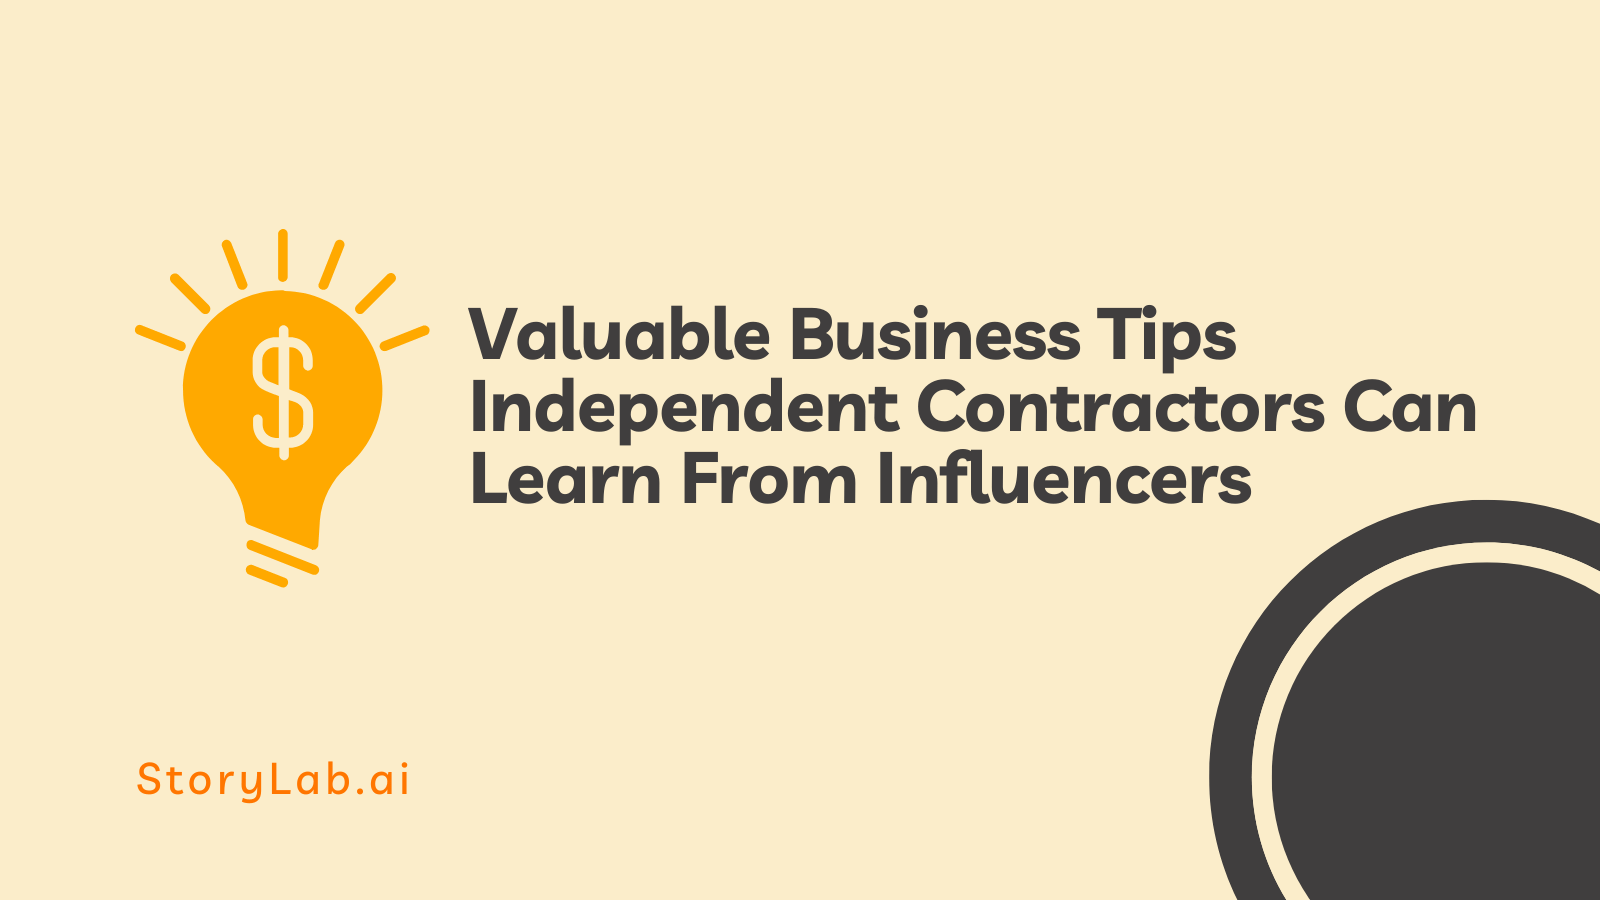 Valuable Business Tips Independent Contractors Can Learn From Influencers